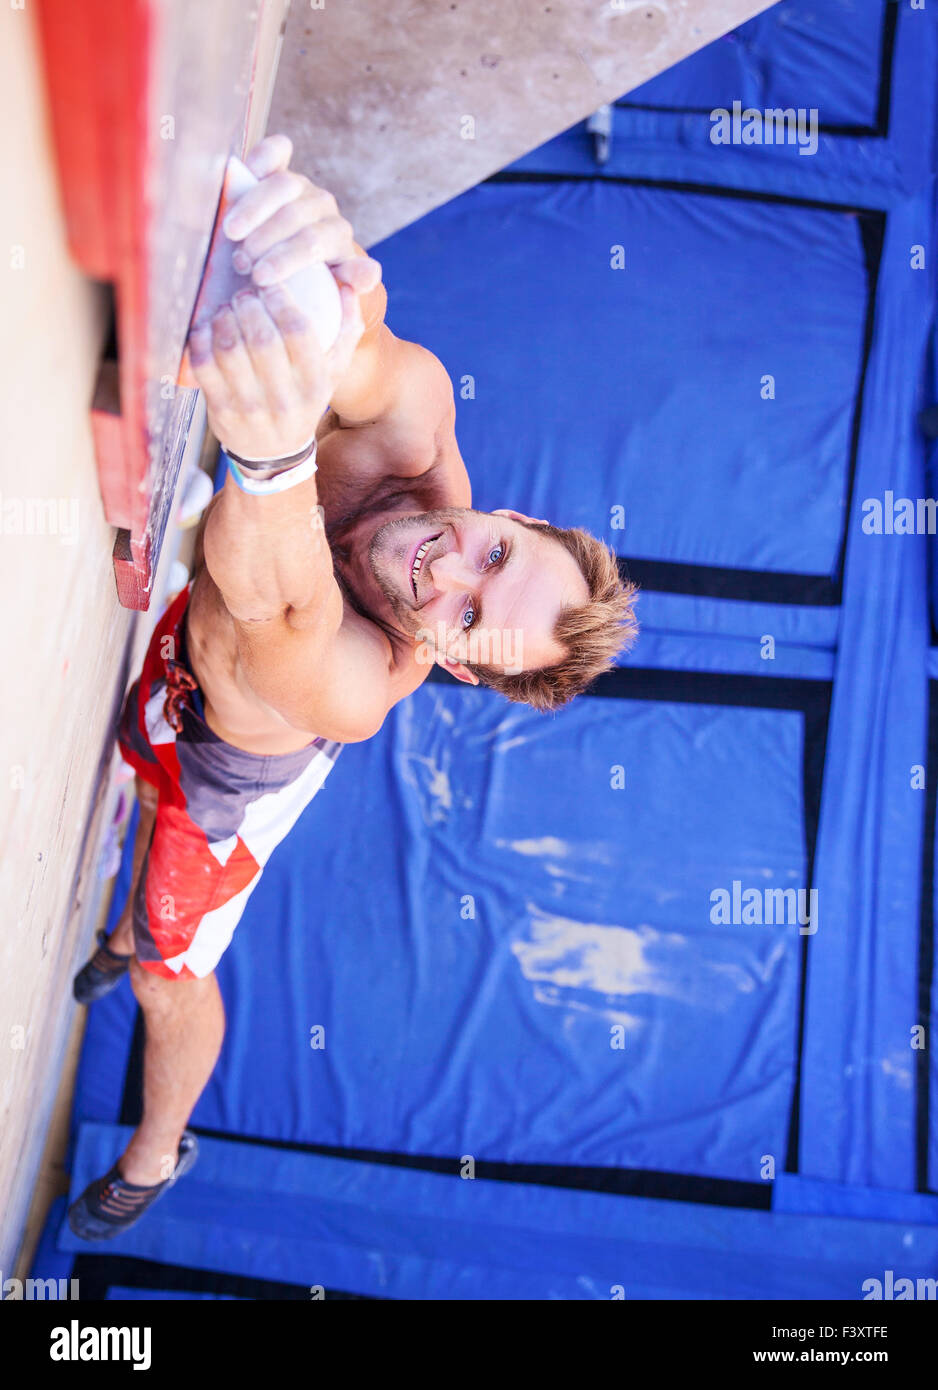 Rock climber participating in climbing competition, gripping top handhold Stock Photo